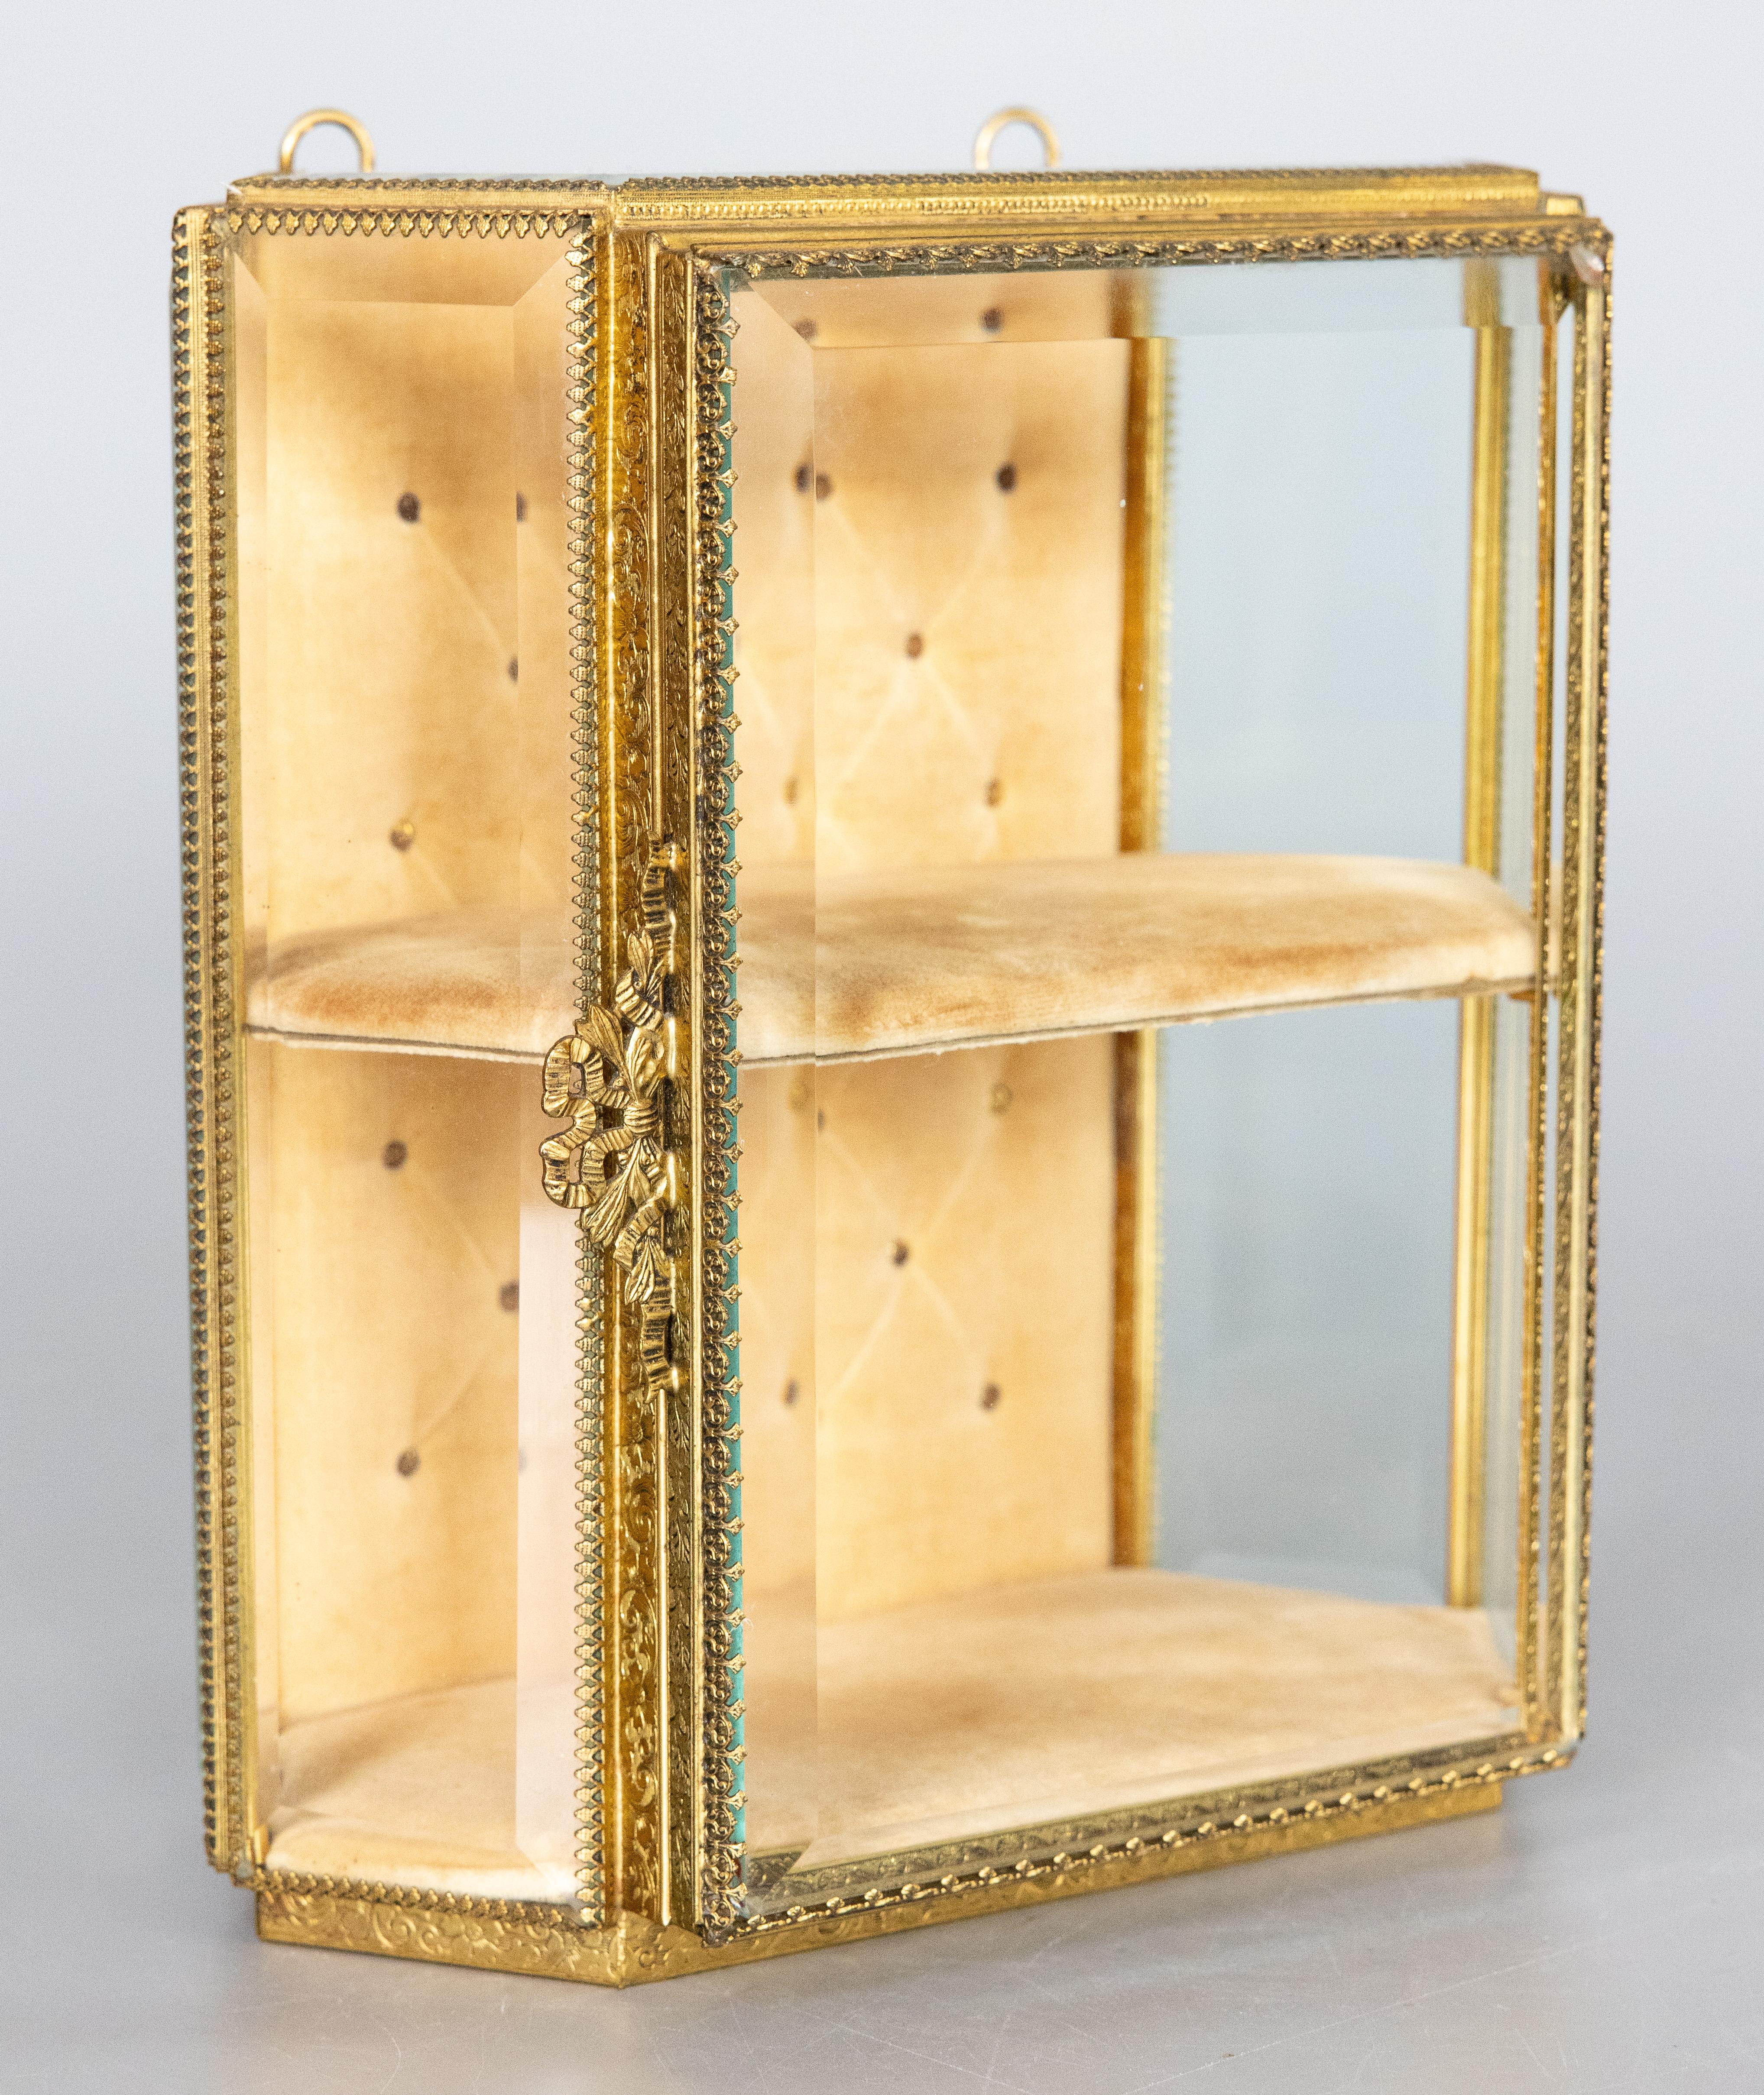 A stunning antique early 20th-Century French wall mounted gilt brass ormolu and beveled glass hanging jewelry casket box with hinged door. It's very rare to find one that hangs on the wall! This fine quality box has a two level compartment design